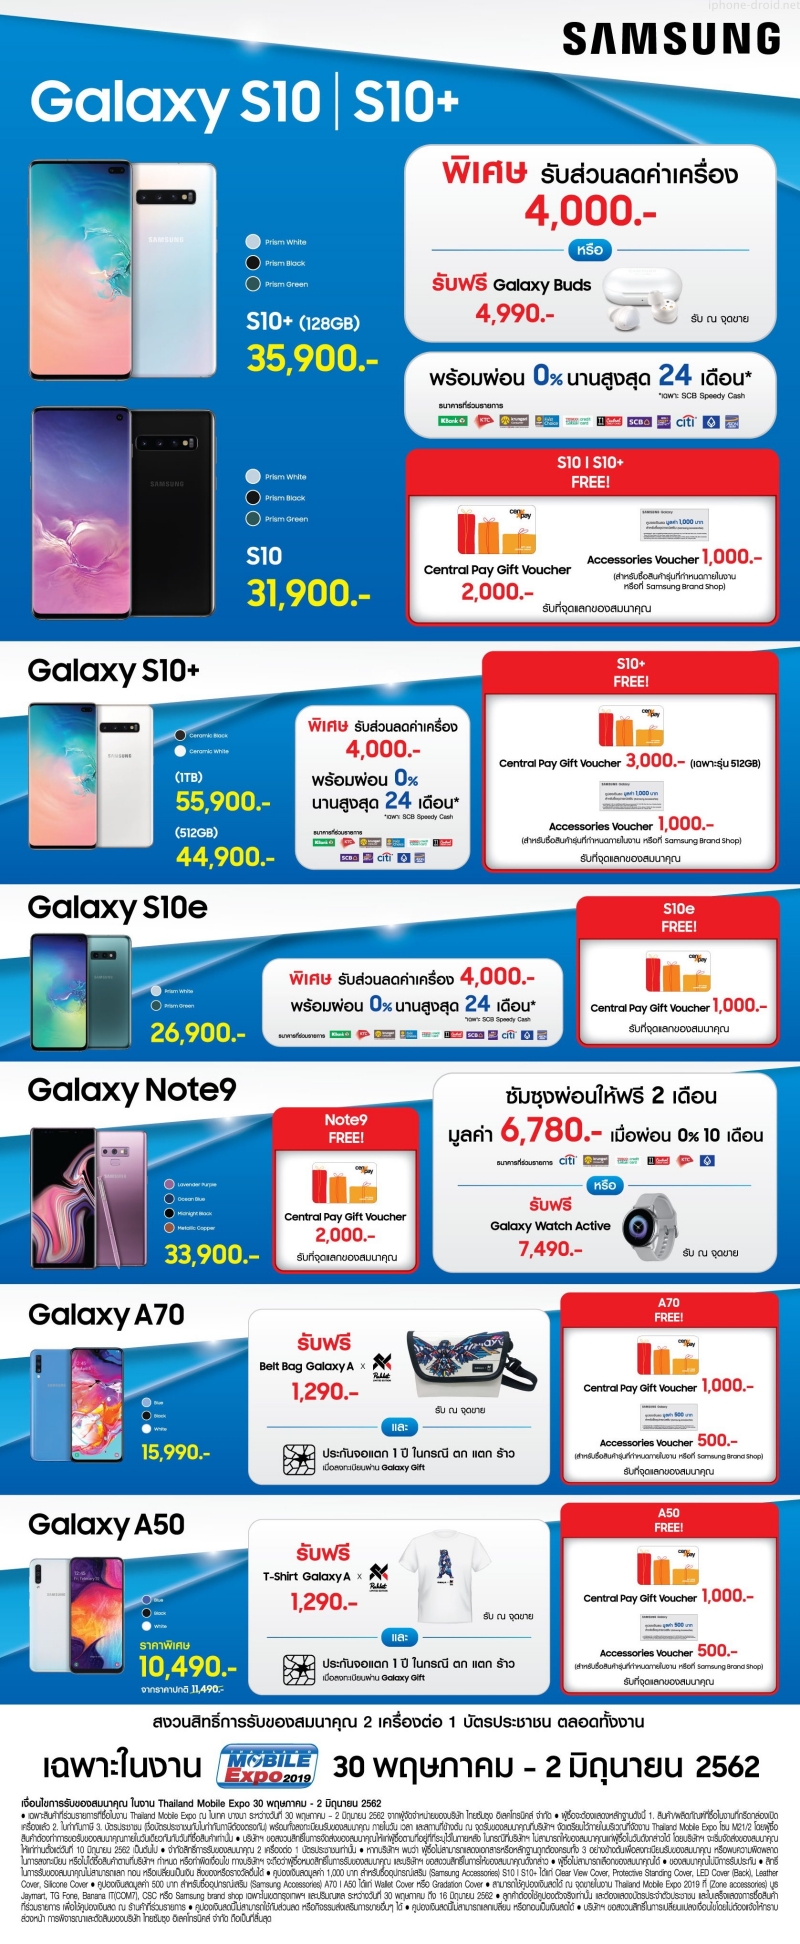 Samsung Promotion Thailand mobile expo 2019 Samsung TME Promotion